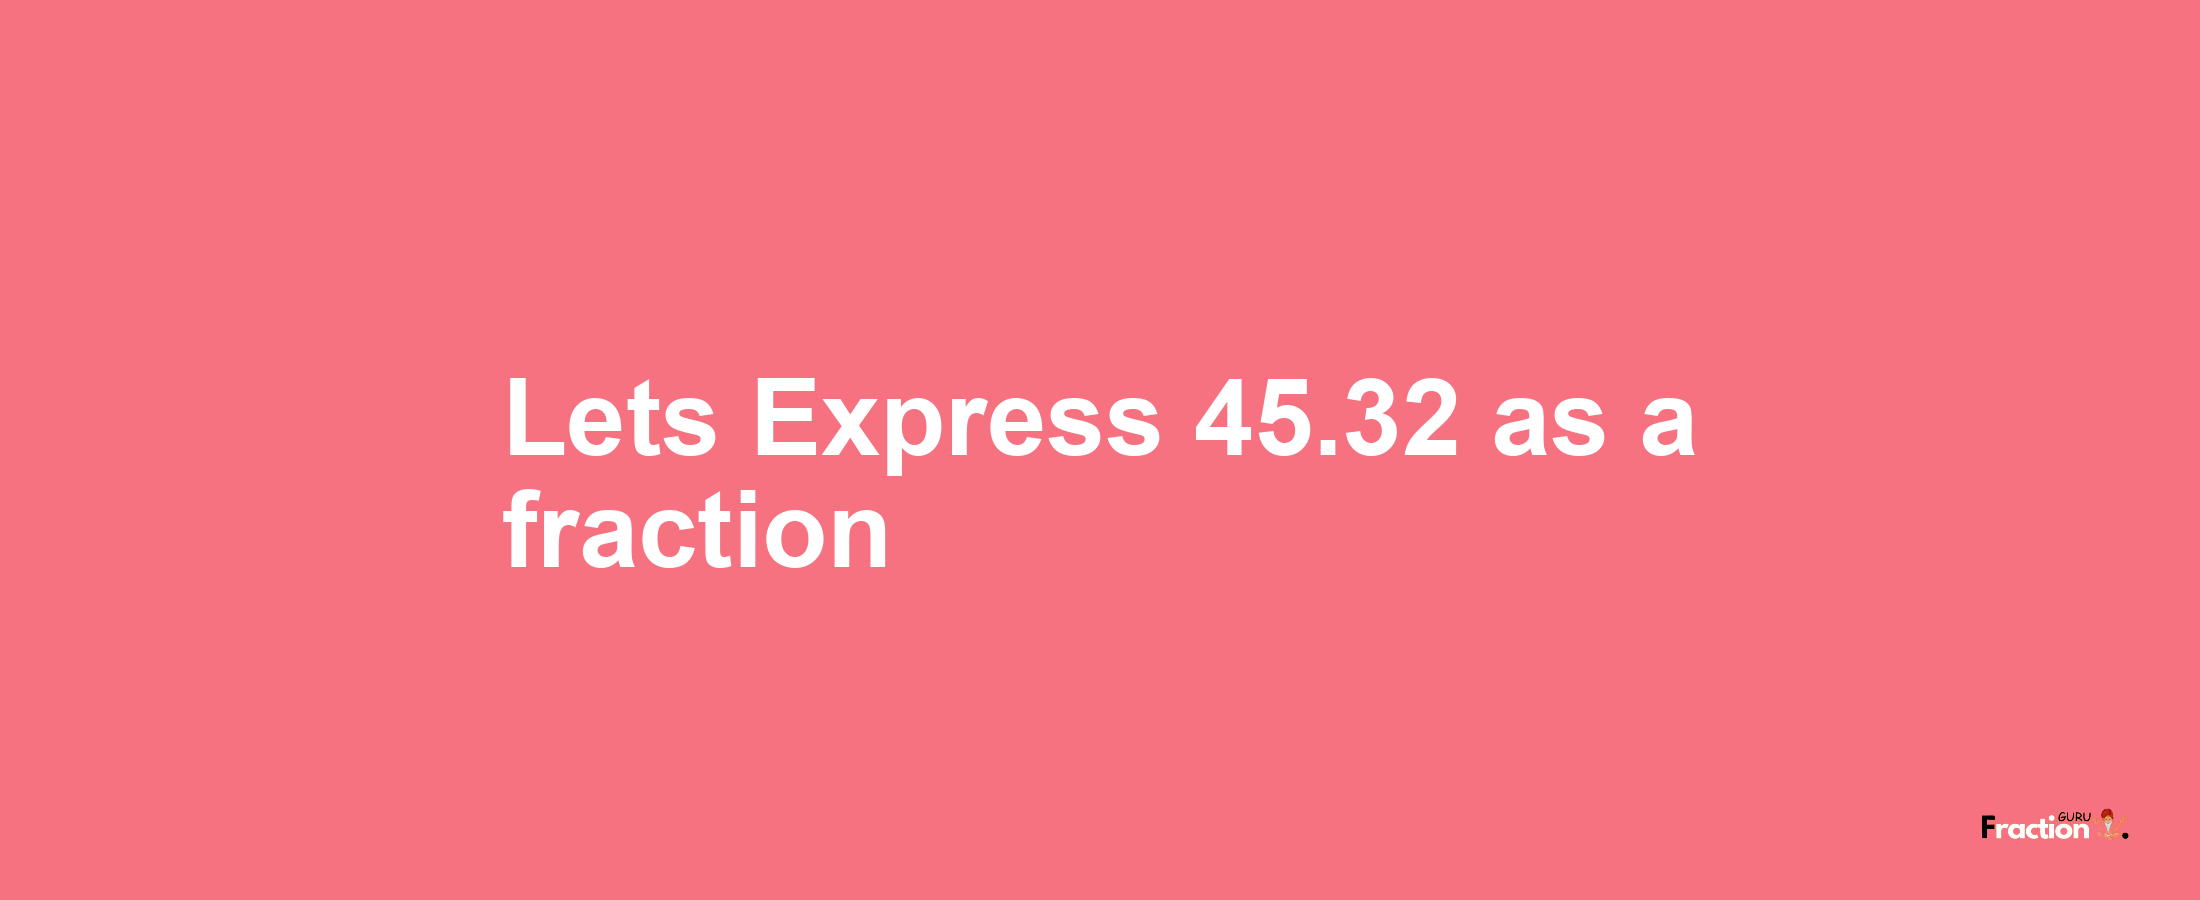 Lets Express 45.32 as afraction